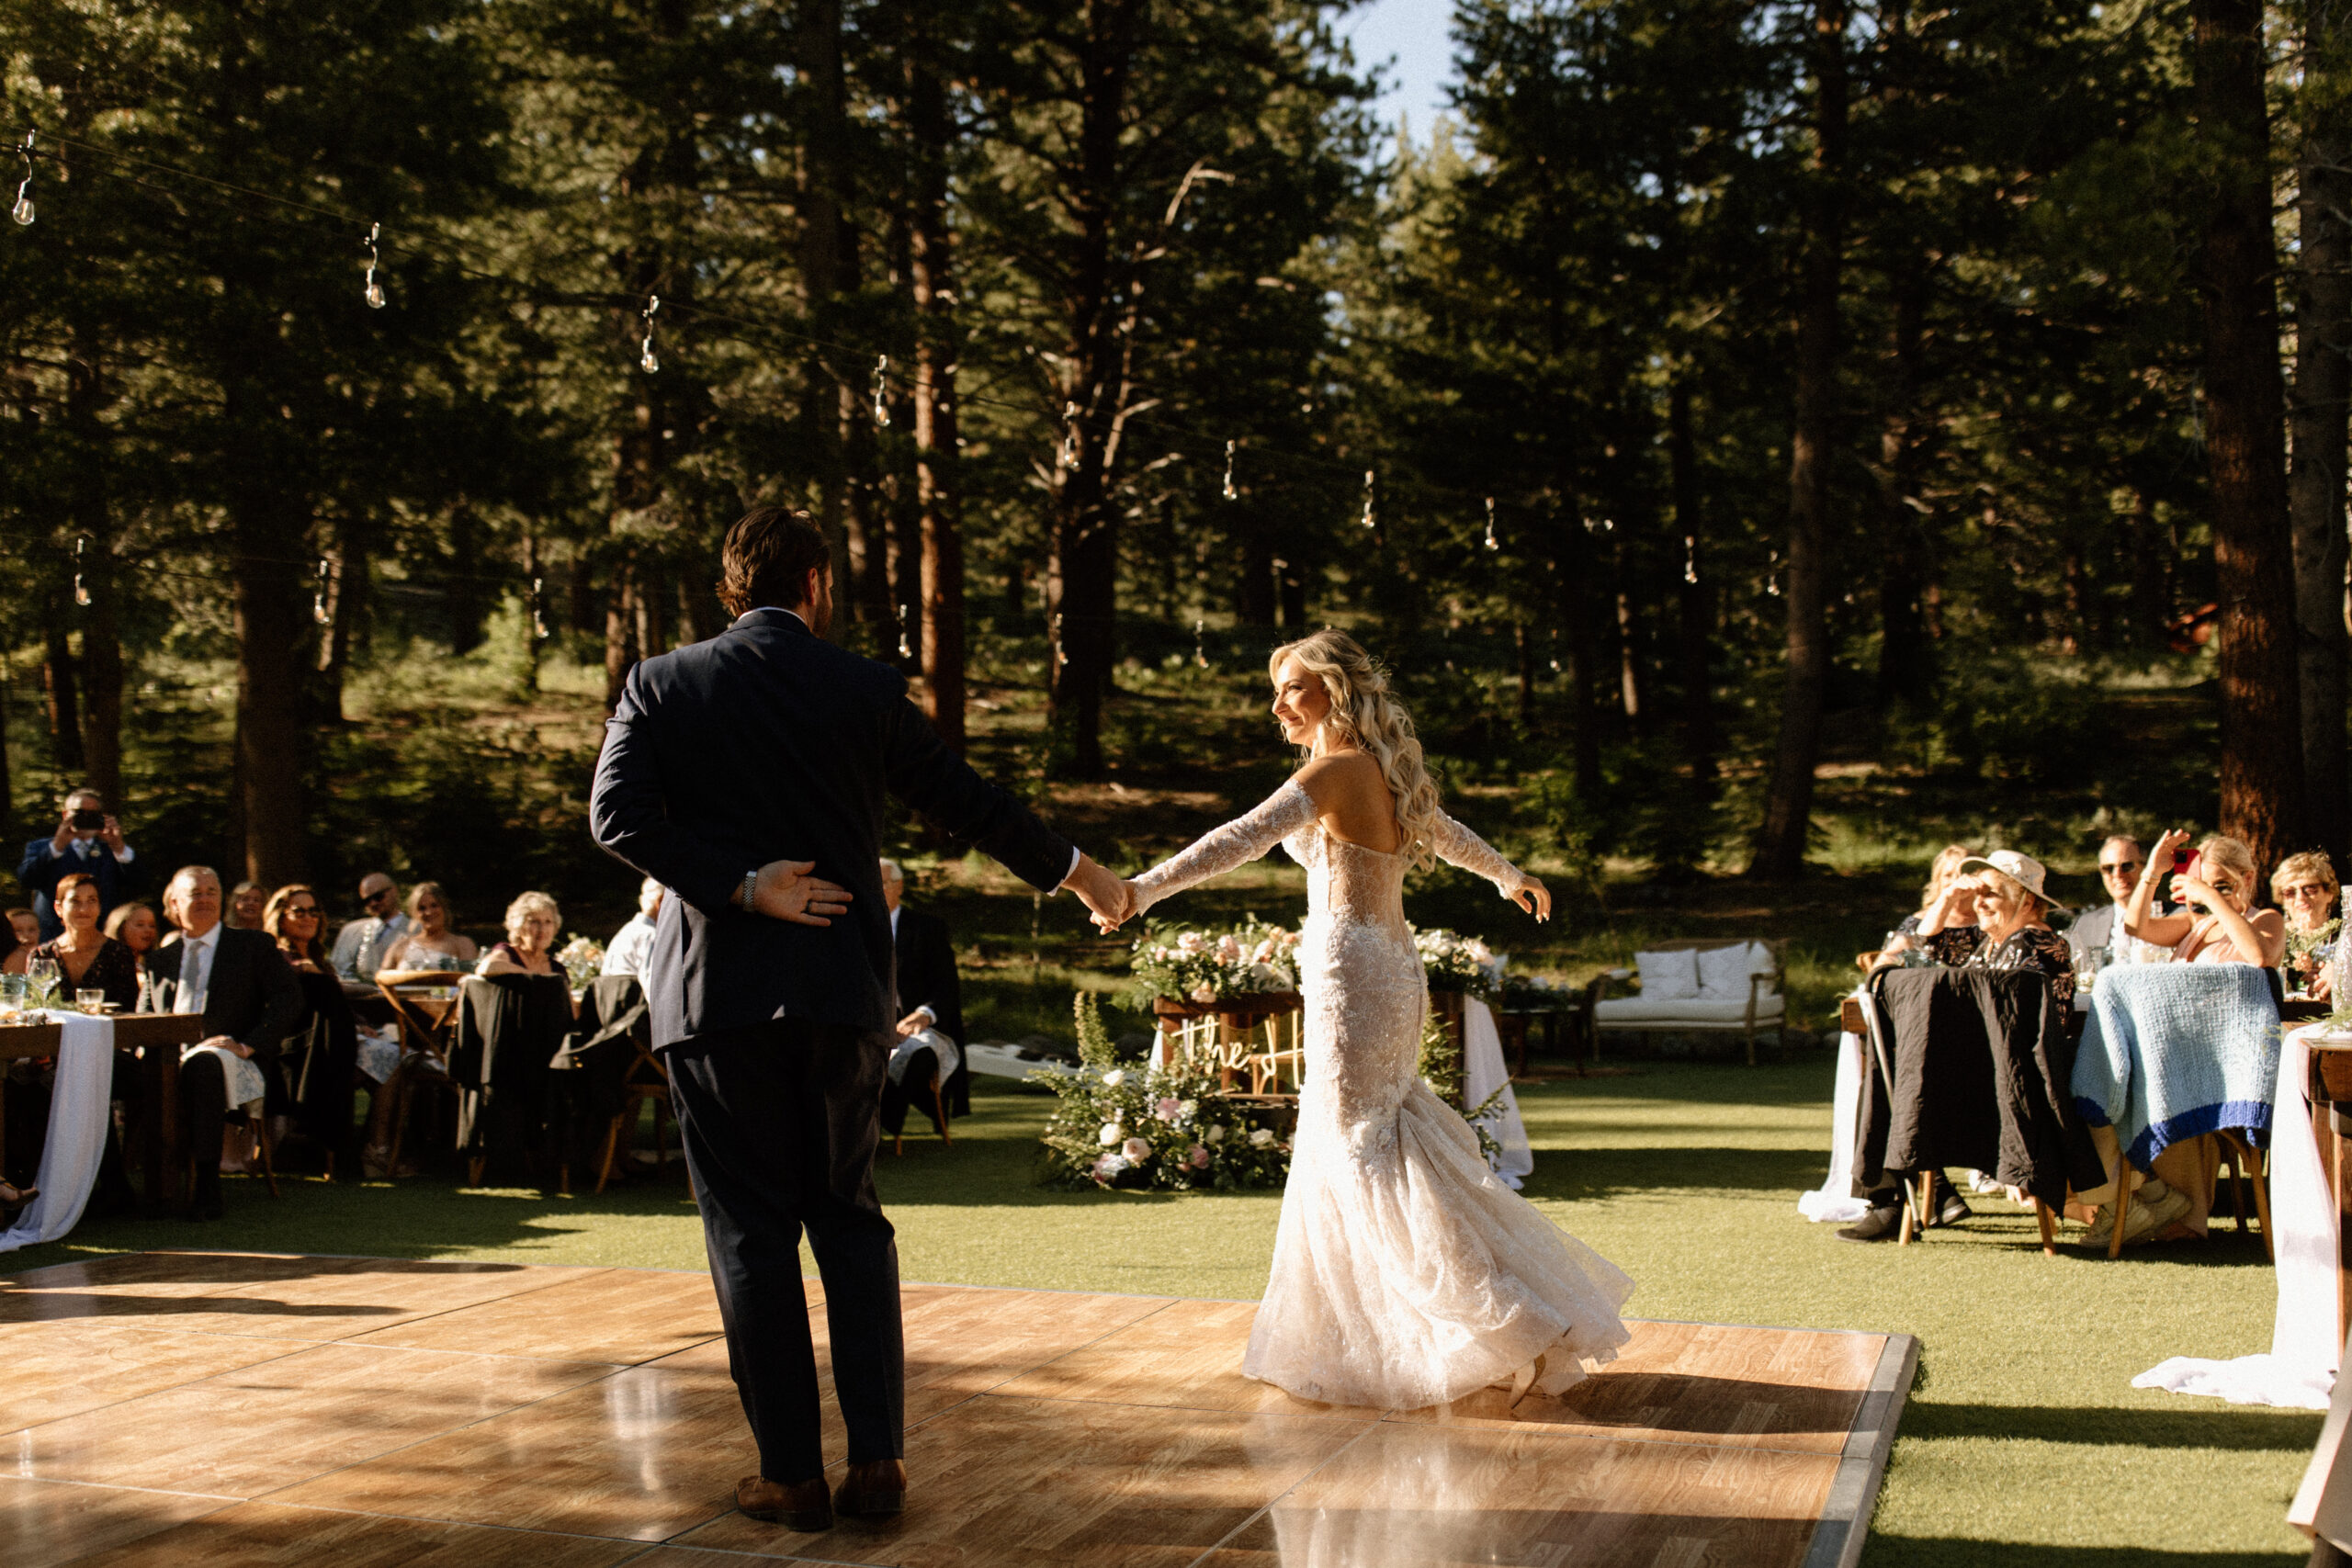 bride and groom share a first dance together while their guests look on